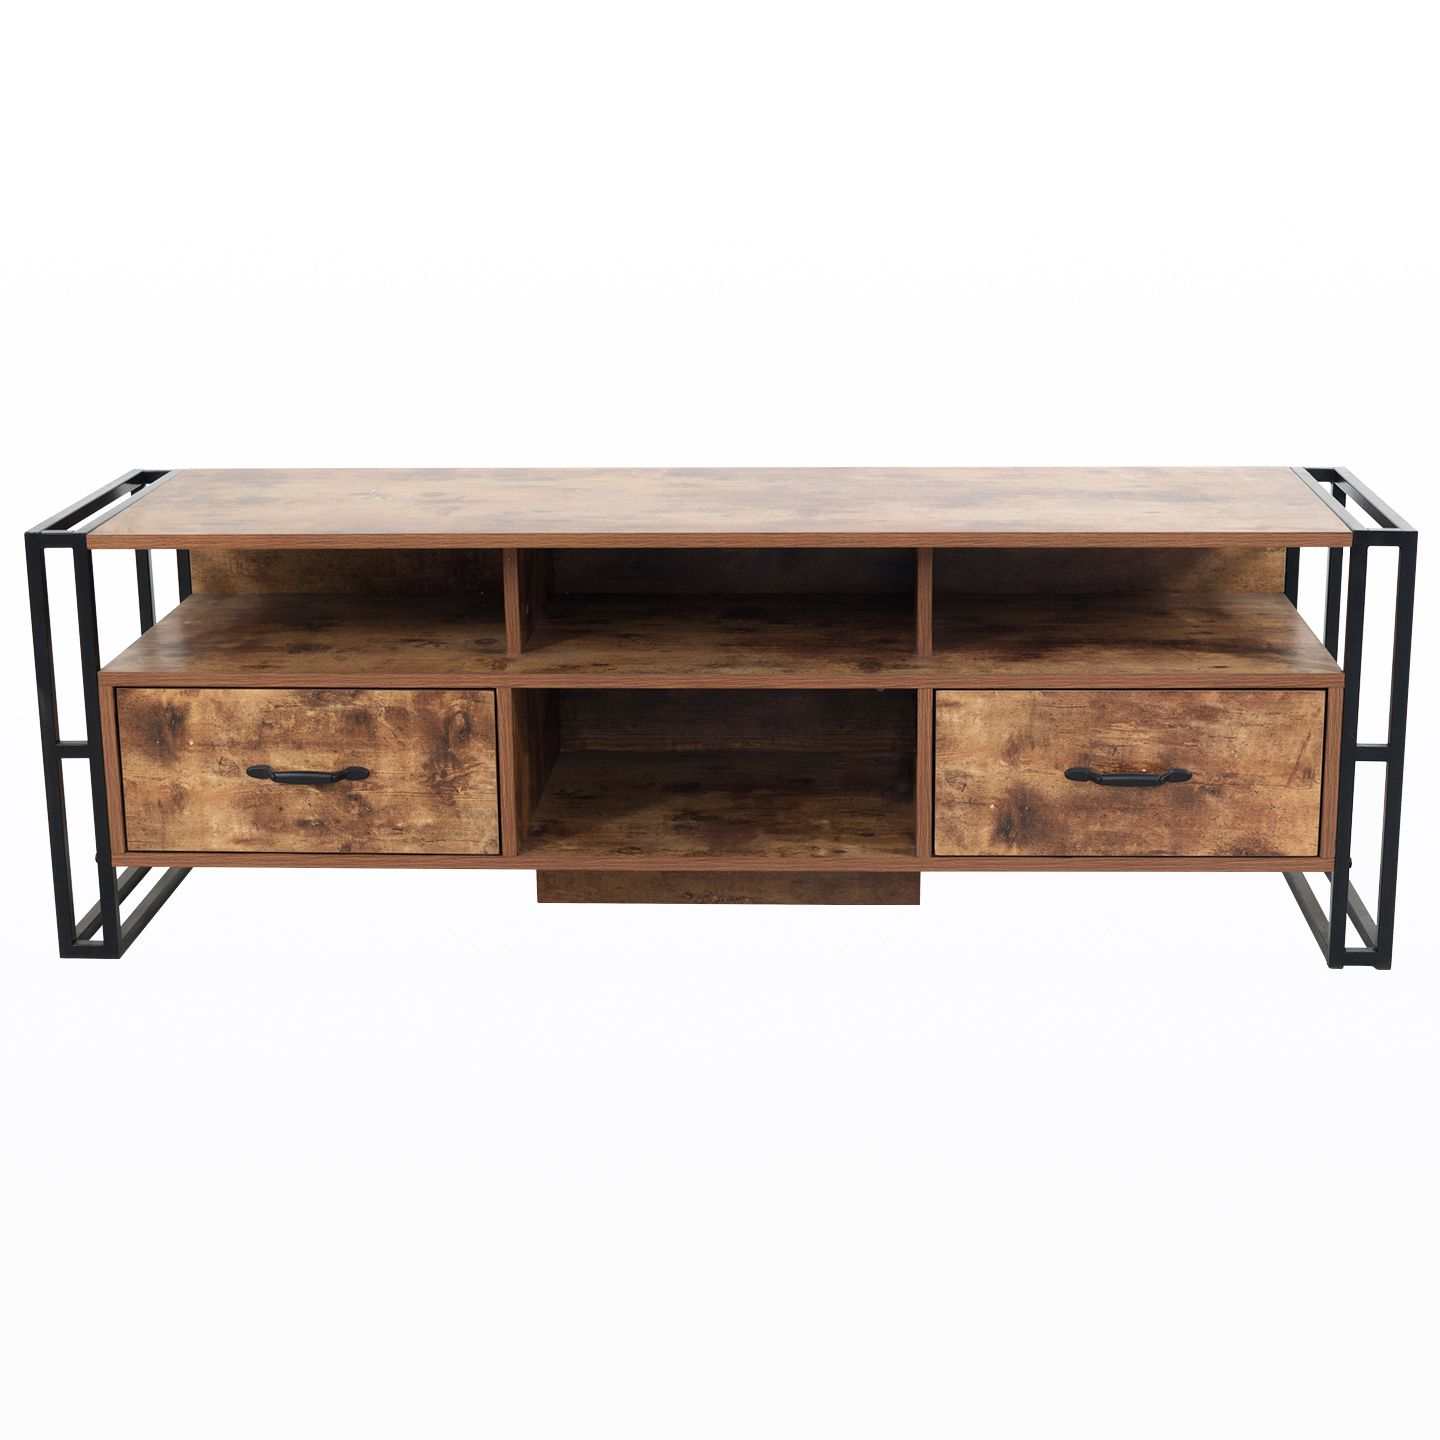 Urban Line Tv Stand – Rustic Wood | Living Essentials Corp. Intended For Urban Rustic Tv Stands (Gallery 9 of 20)